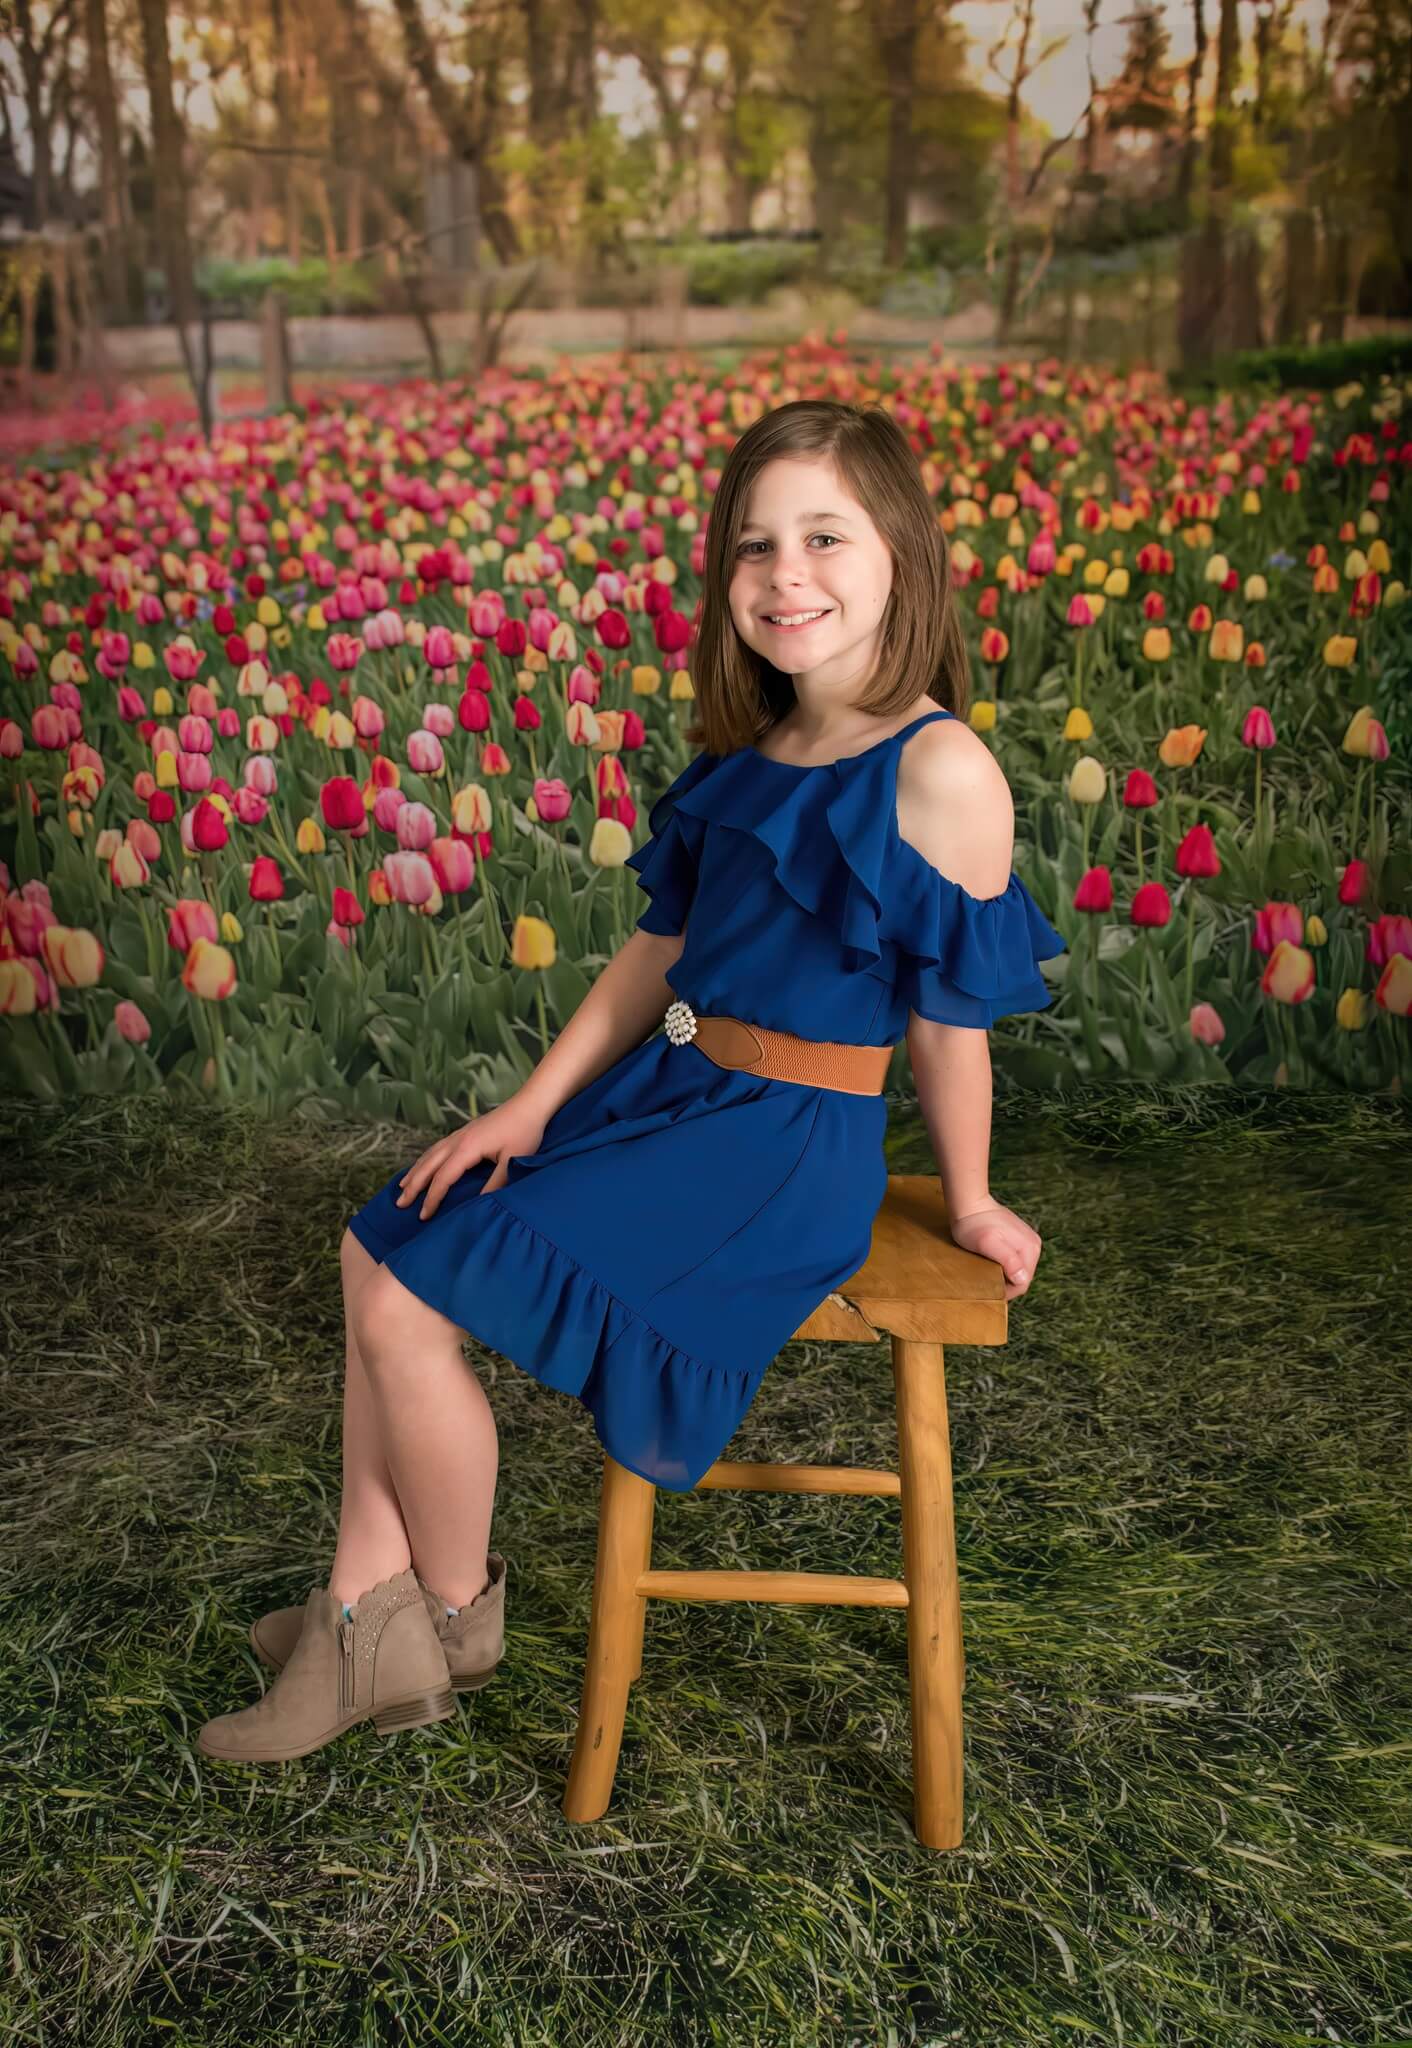 Kate Tulip Field Backdrop Designed by Mandy Ringe Photography